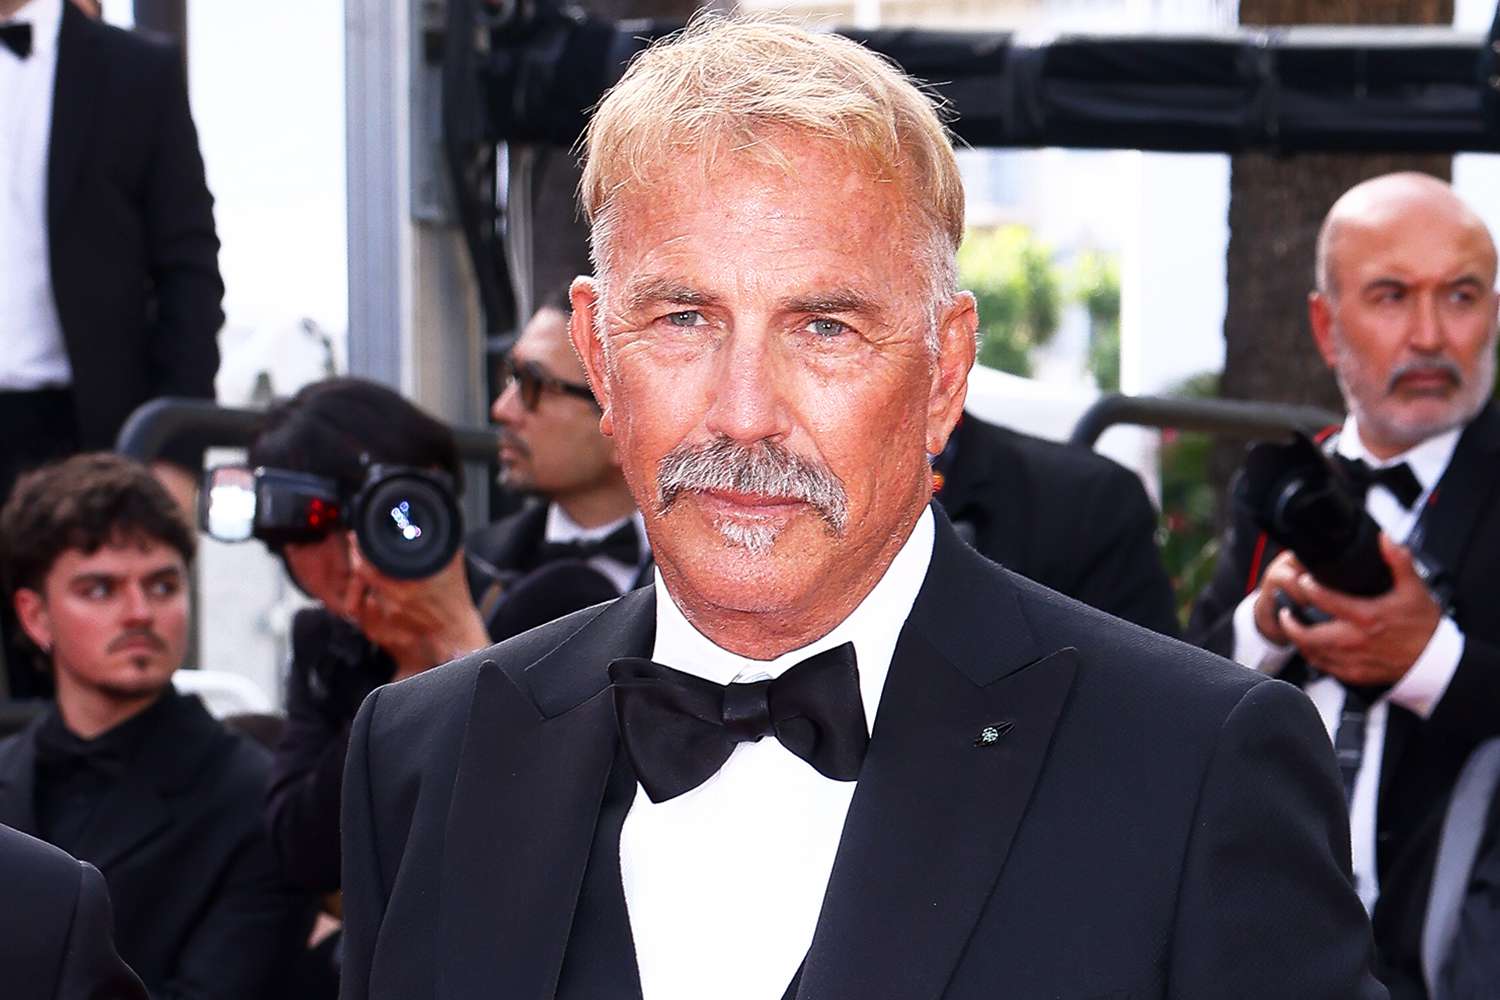 Kevin Costner Says ‘I’m Not Going to Lose Myself’ While ‘Dealing with’ Aftermath of Divorce